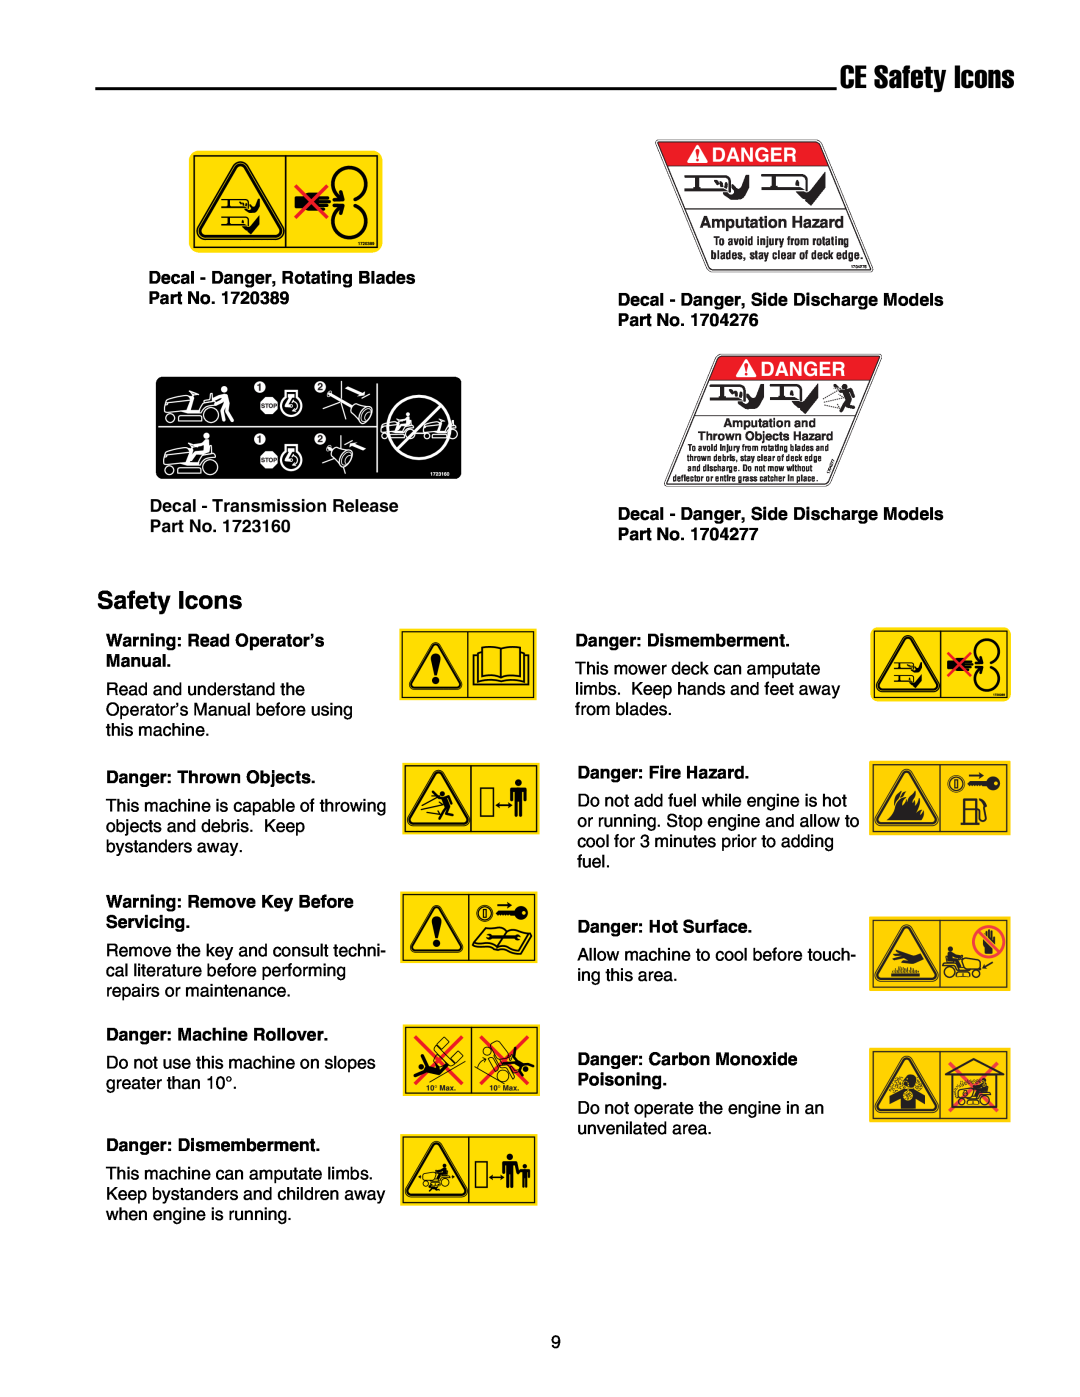 Snapper 1700, 2700, 400 manual CE Safety Icons, Decal - Danger, Rotating Blades, Decal - Transmission Release 